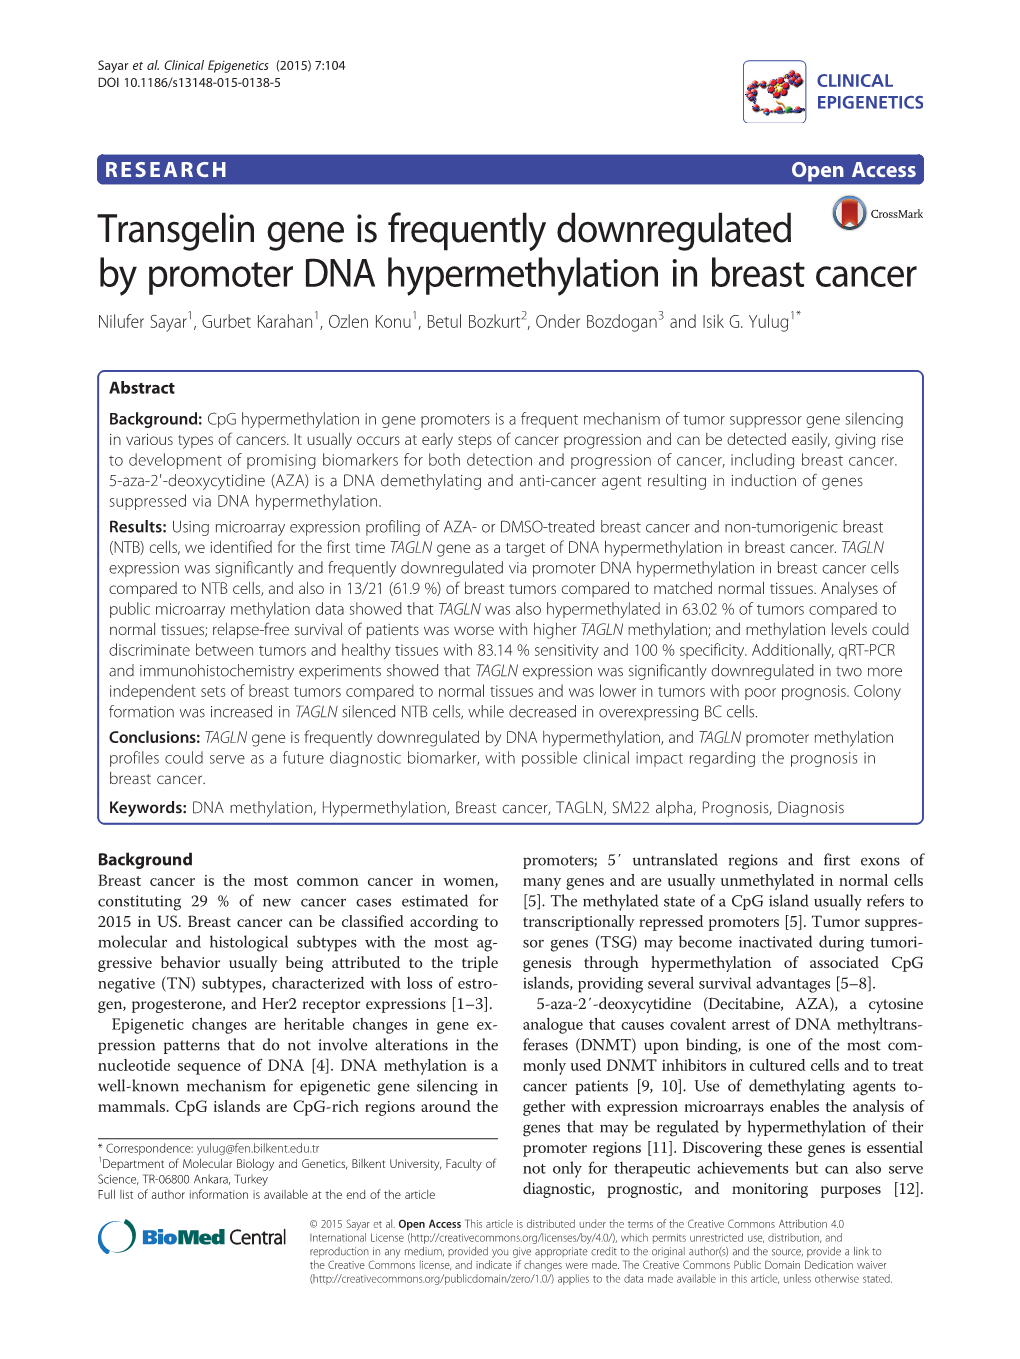 Transgelin Gene Is Frequently Downregulated by Promoter DNA